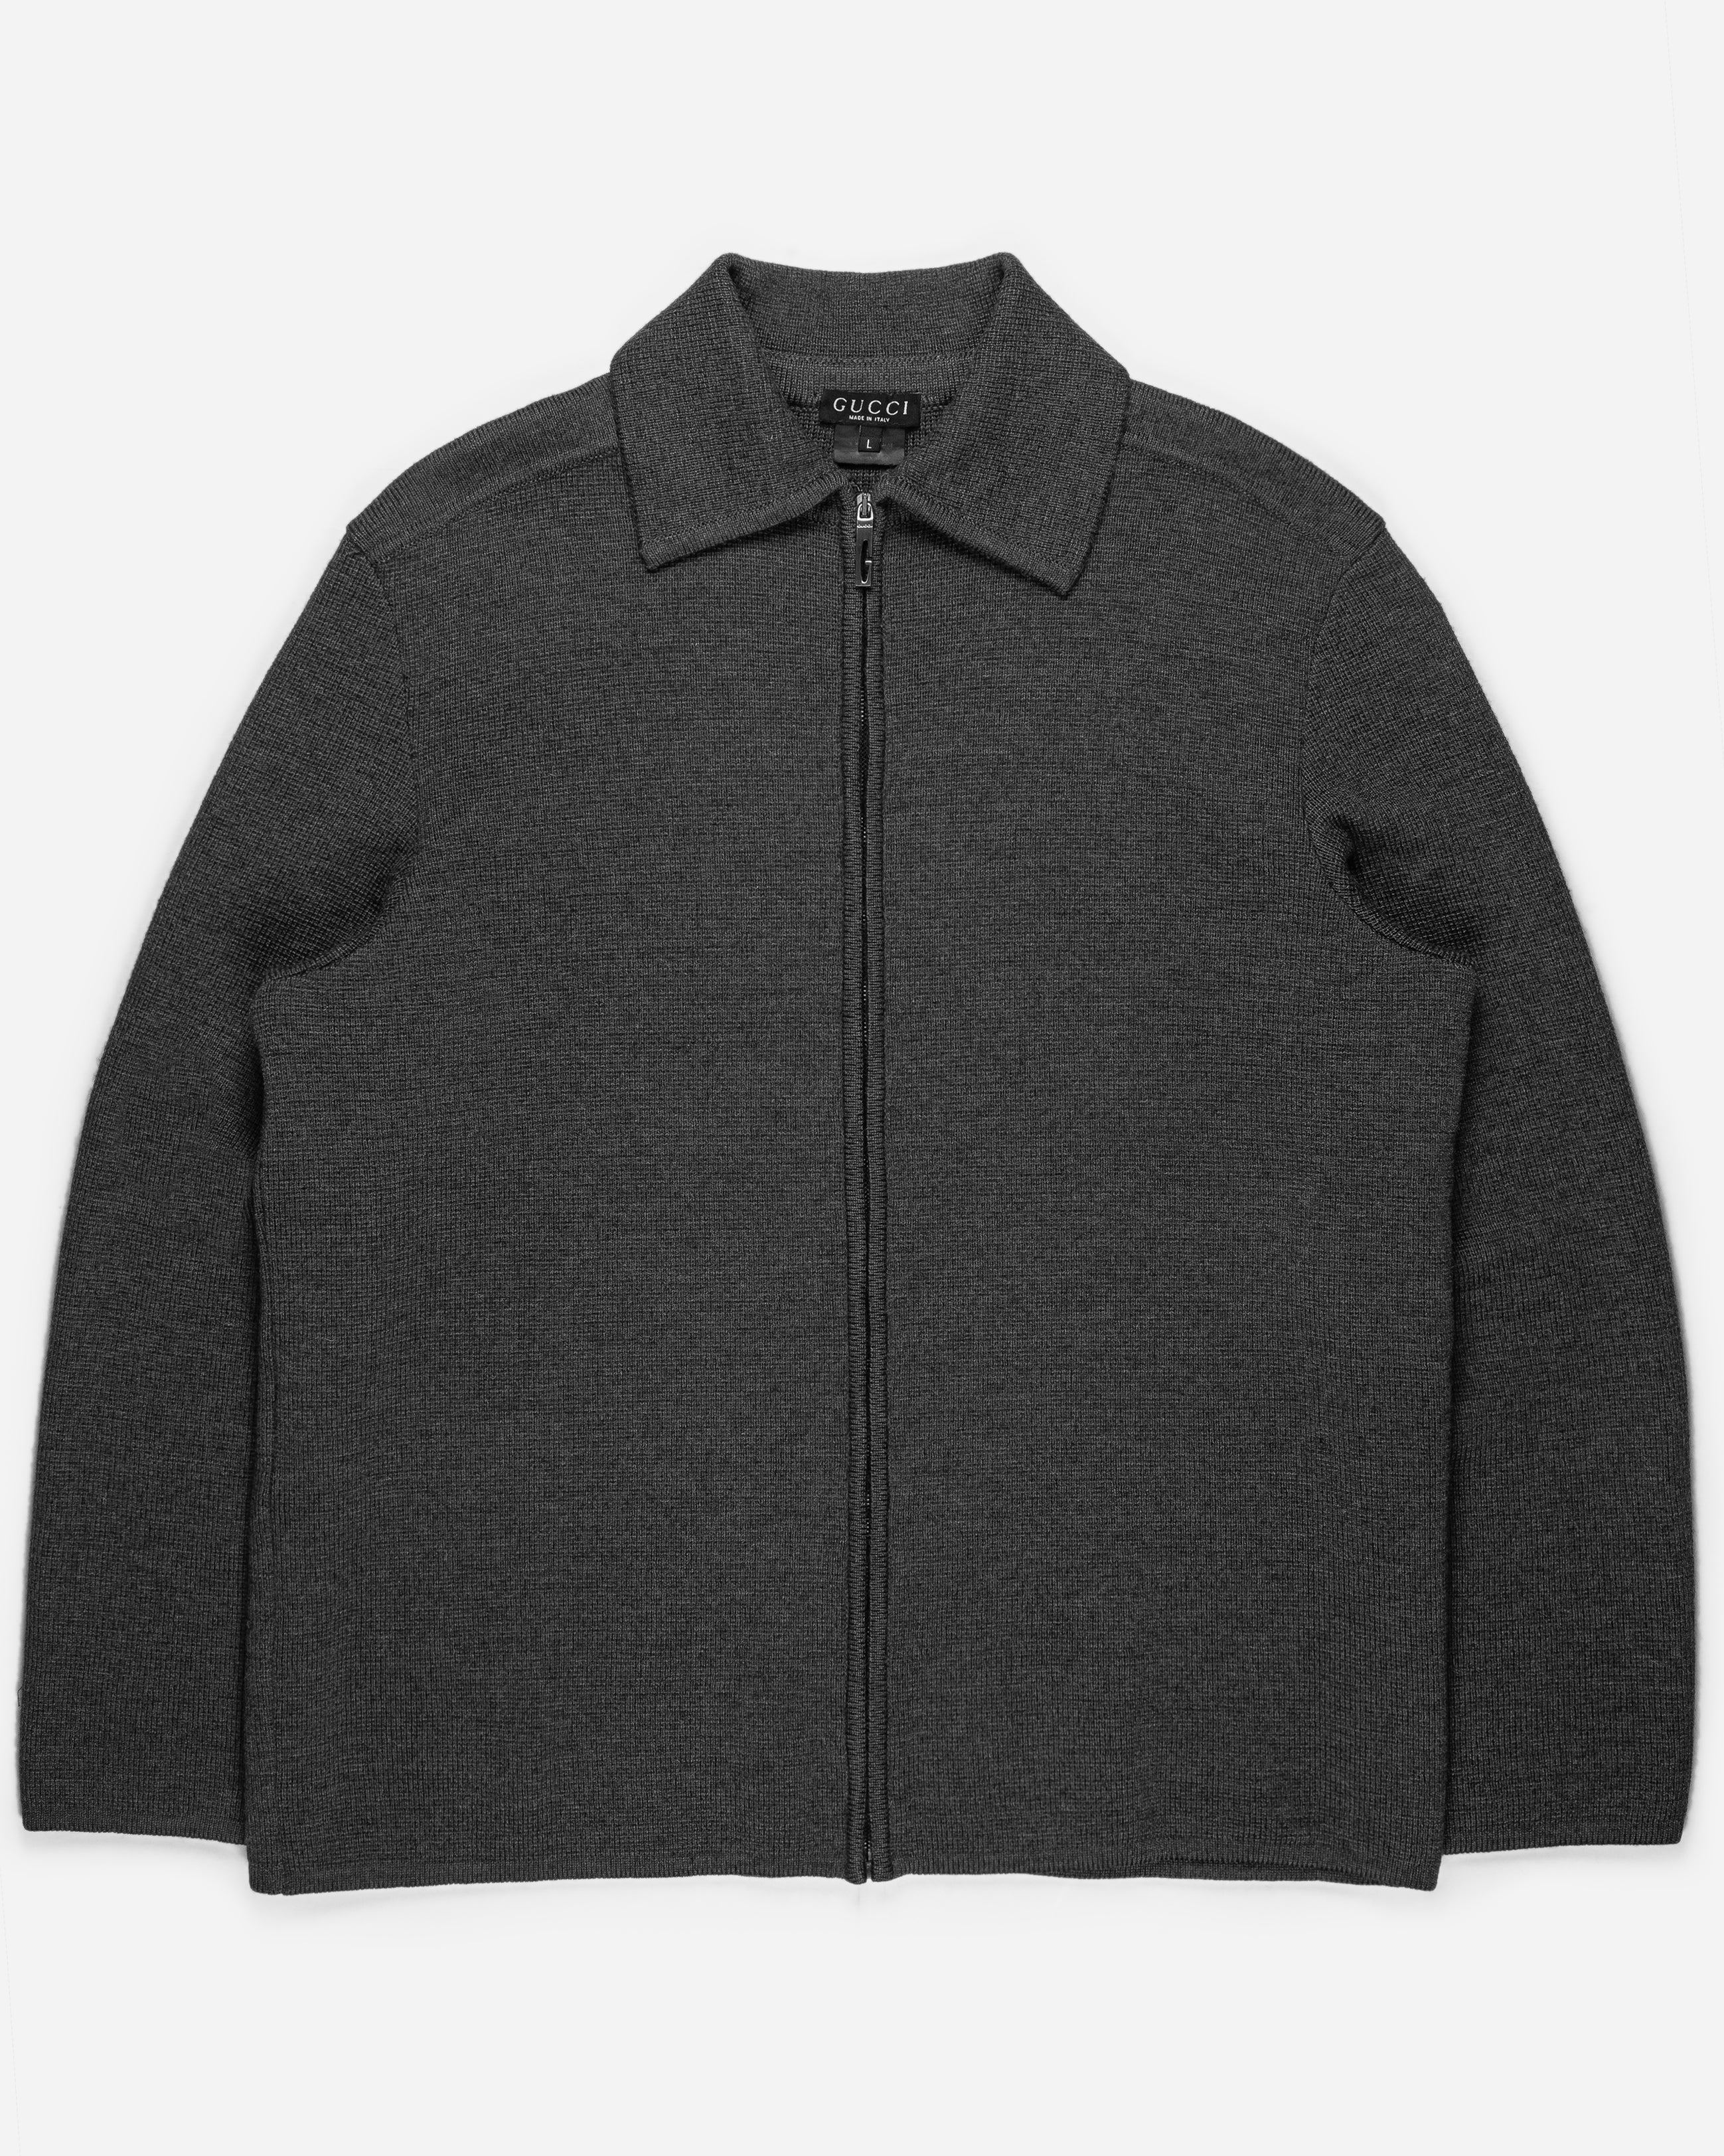 Gucci by Tom Ford Charcoal Grey Driver's Knit Zip-Up Sweater